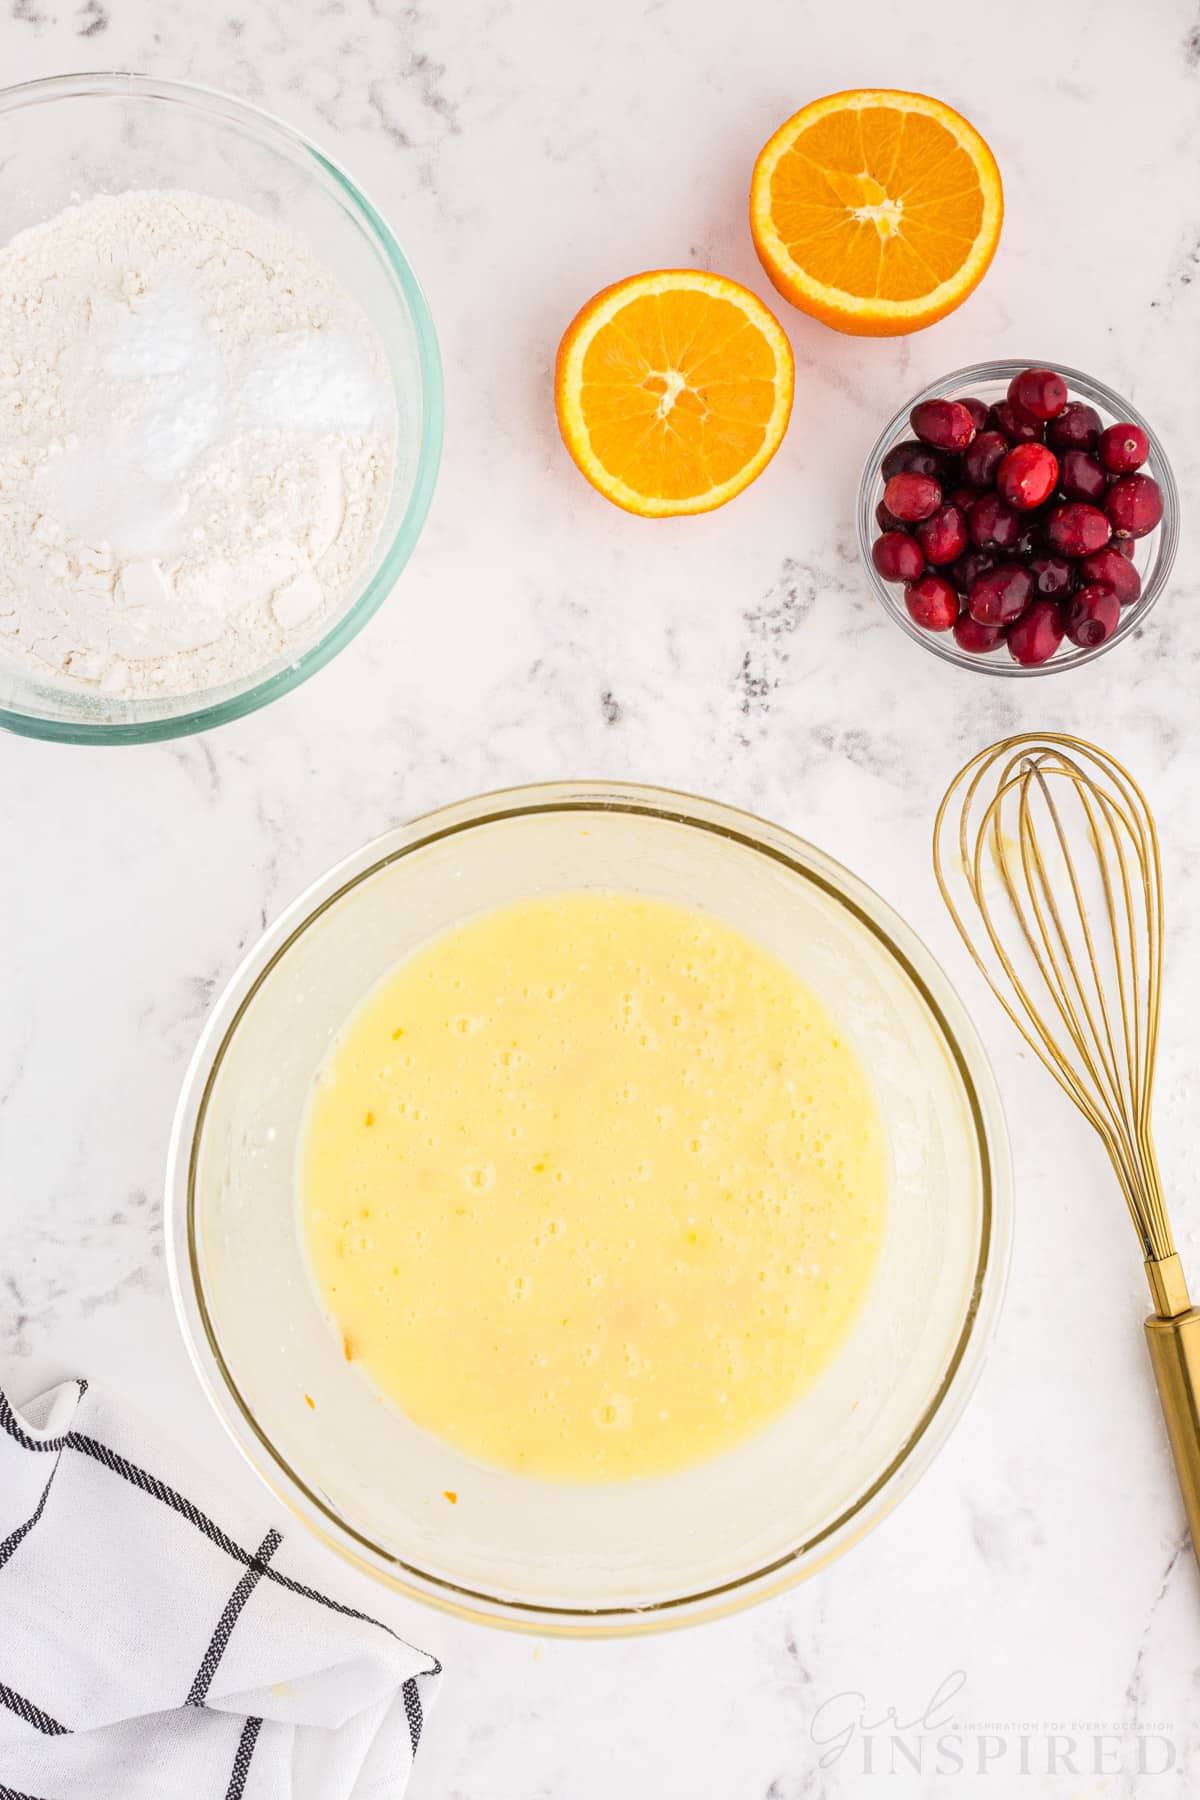 Mixing bowl with all wet ingredients combined with freshly squeezed orange juice, bowl of dry ingredients, bowl of fresh cranberries, sliced orange, checked linen, metal whisk on a white marble countertop.